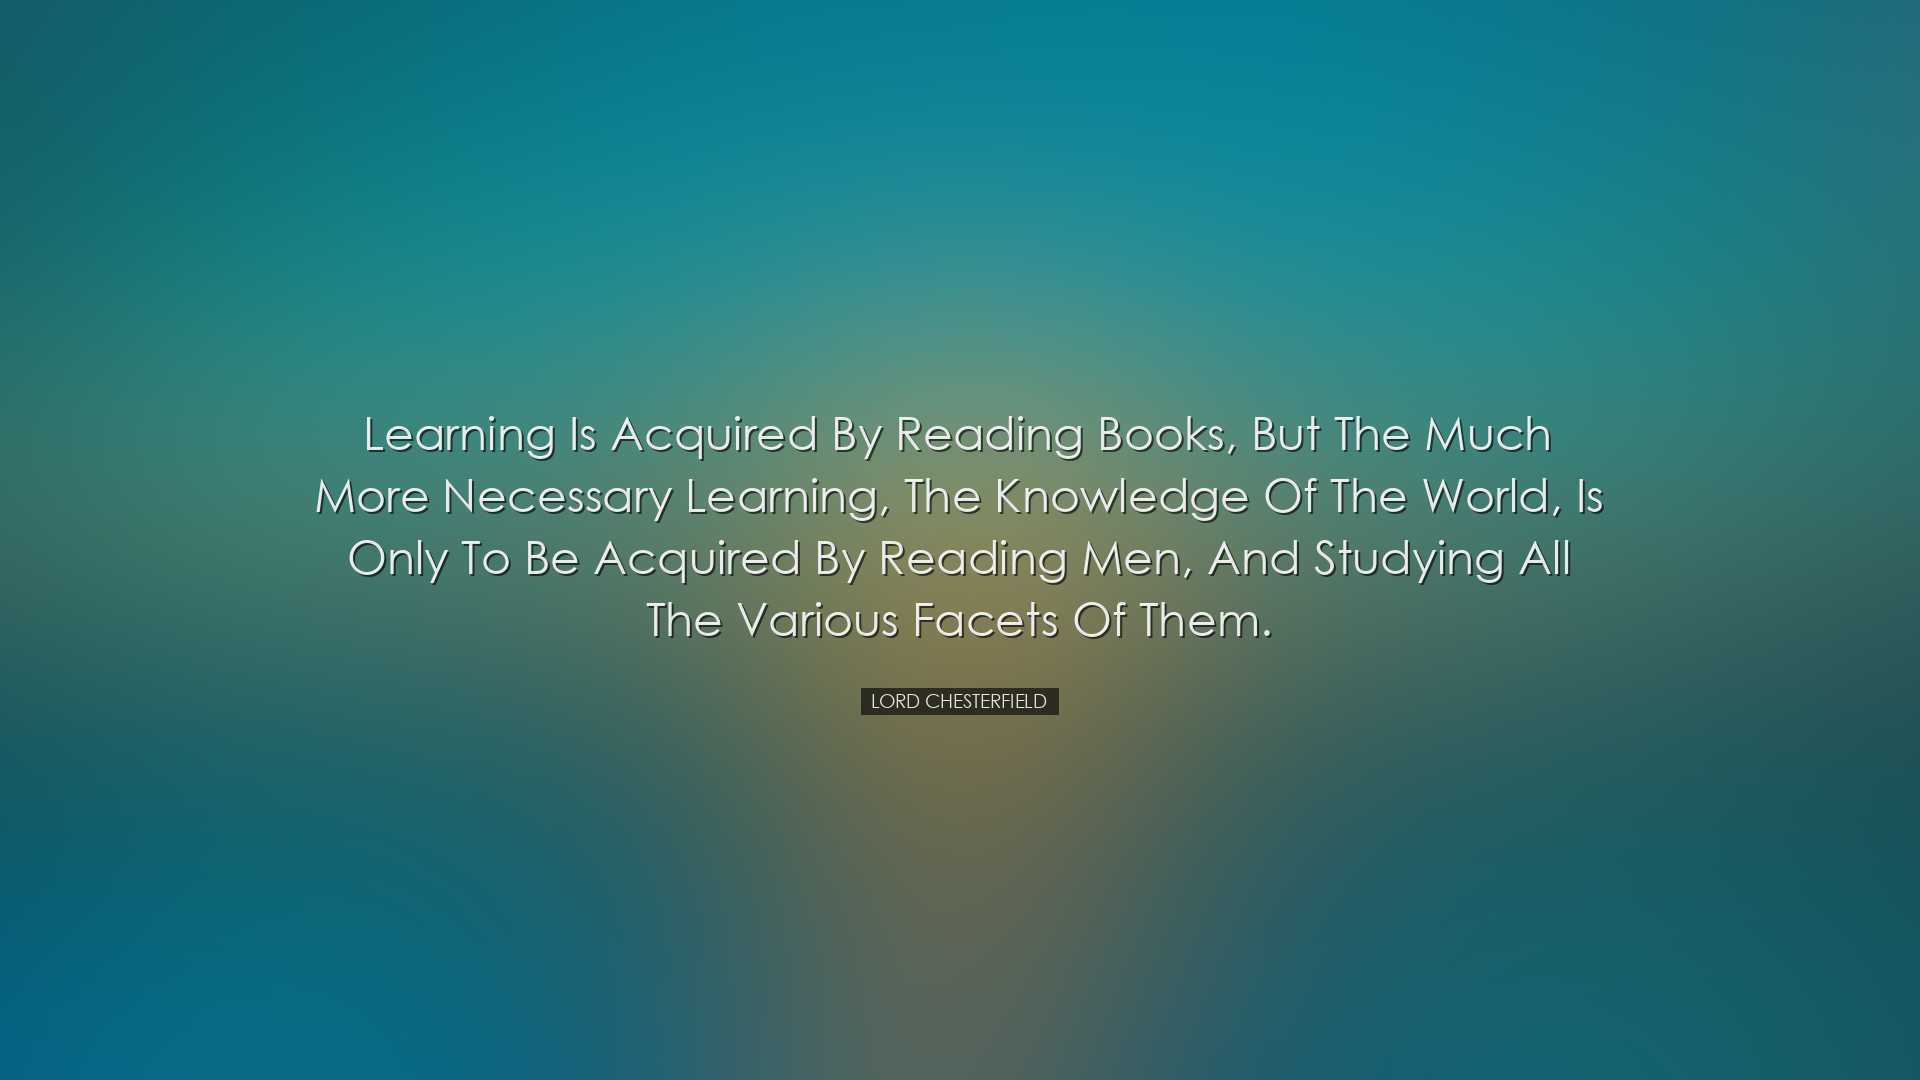 Learning is acquired by reading books, but the much more necessary